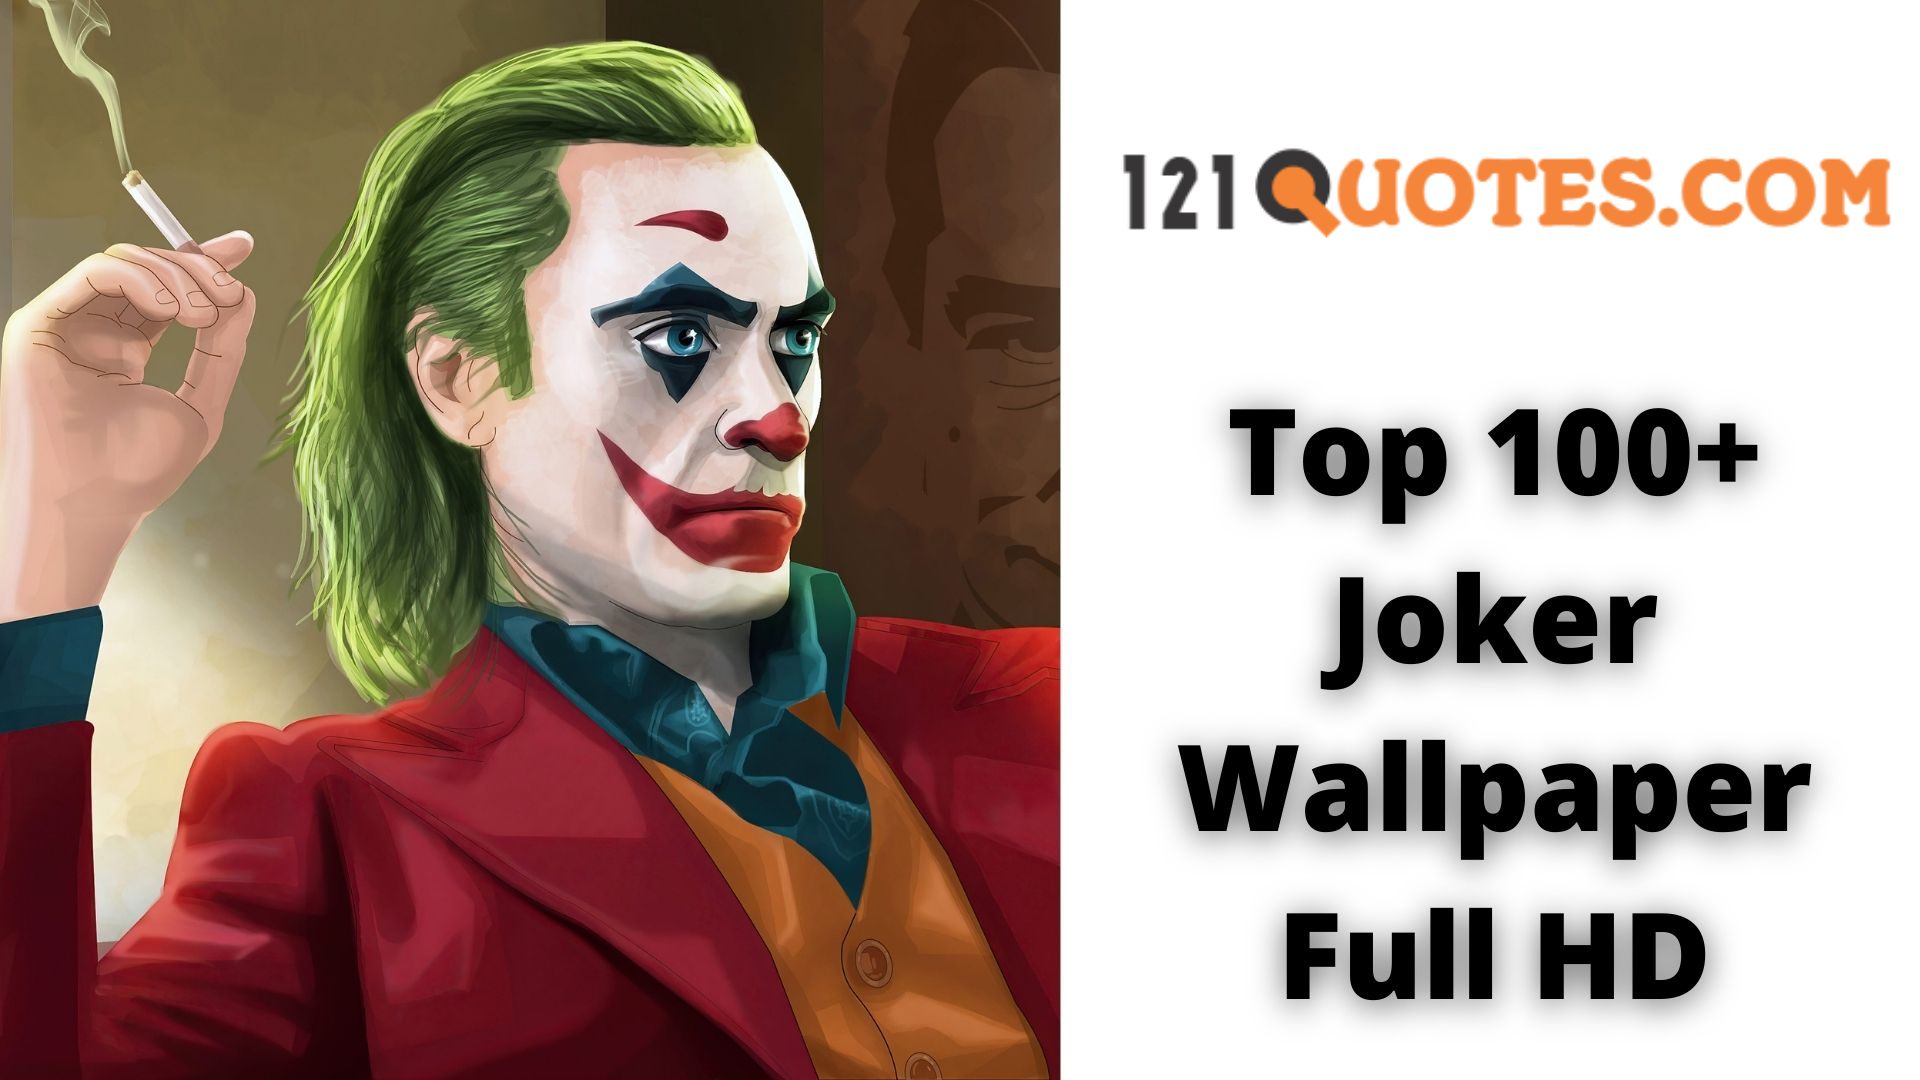 Download Joker wallpapers for mobile phone free Joker HD pictures